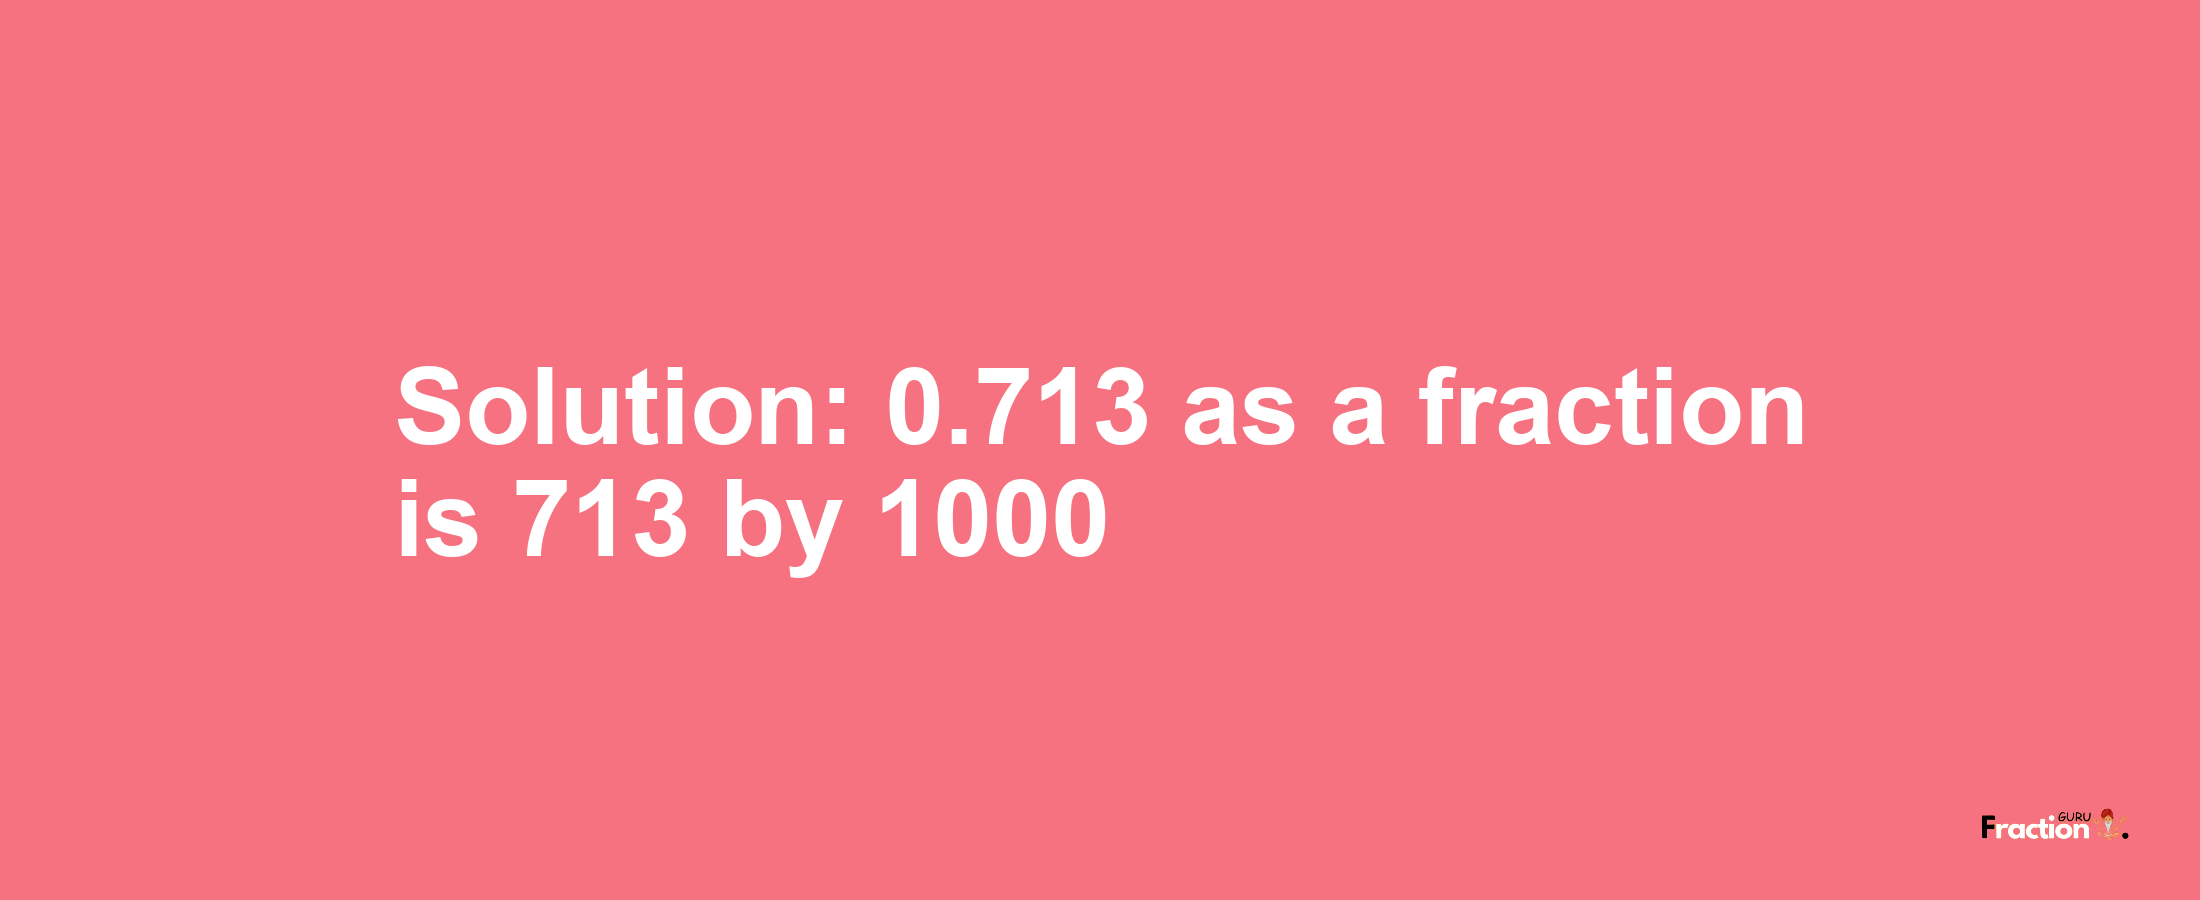 Solution:0.713 as a fraction is 713/1000